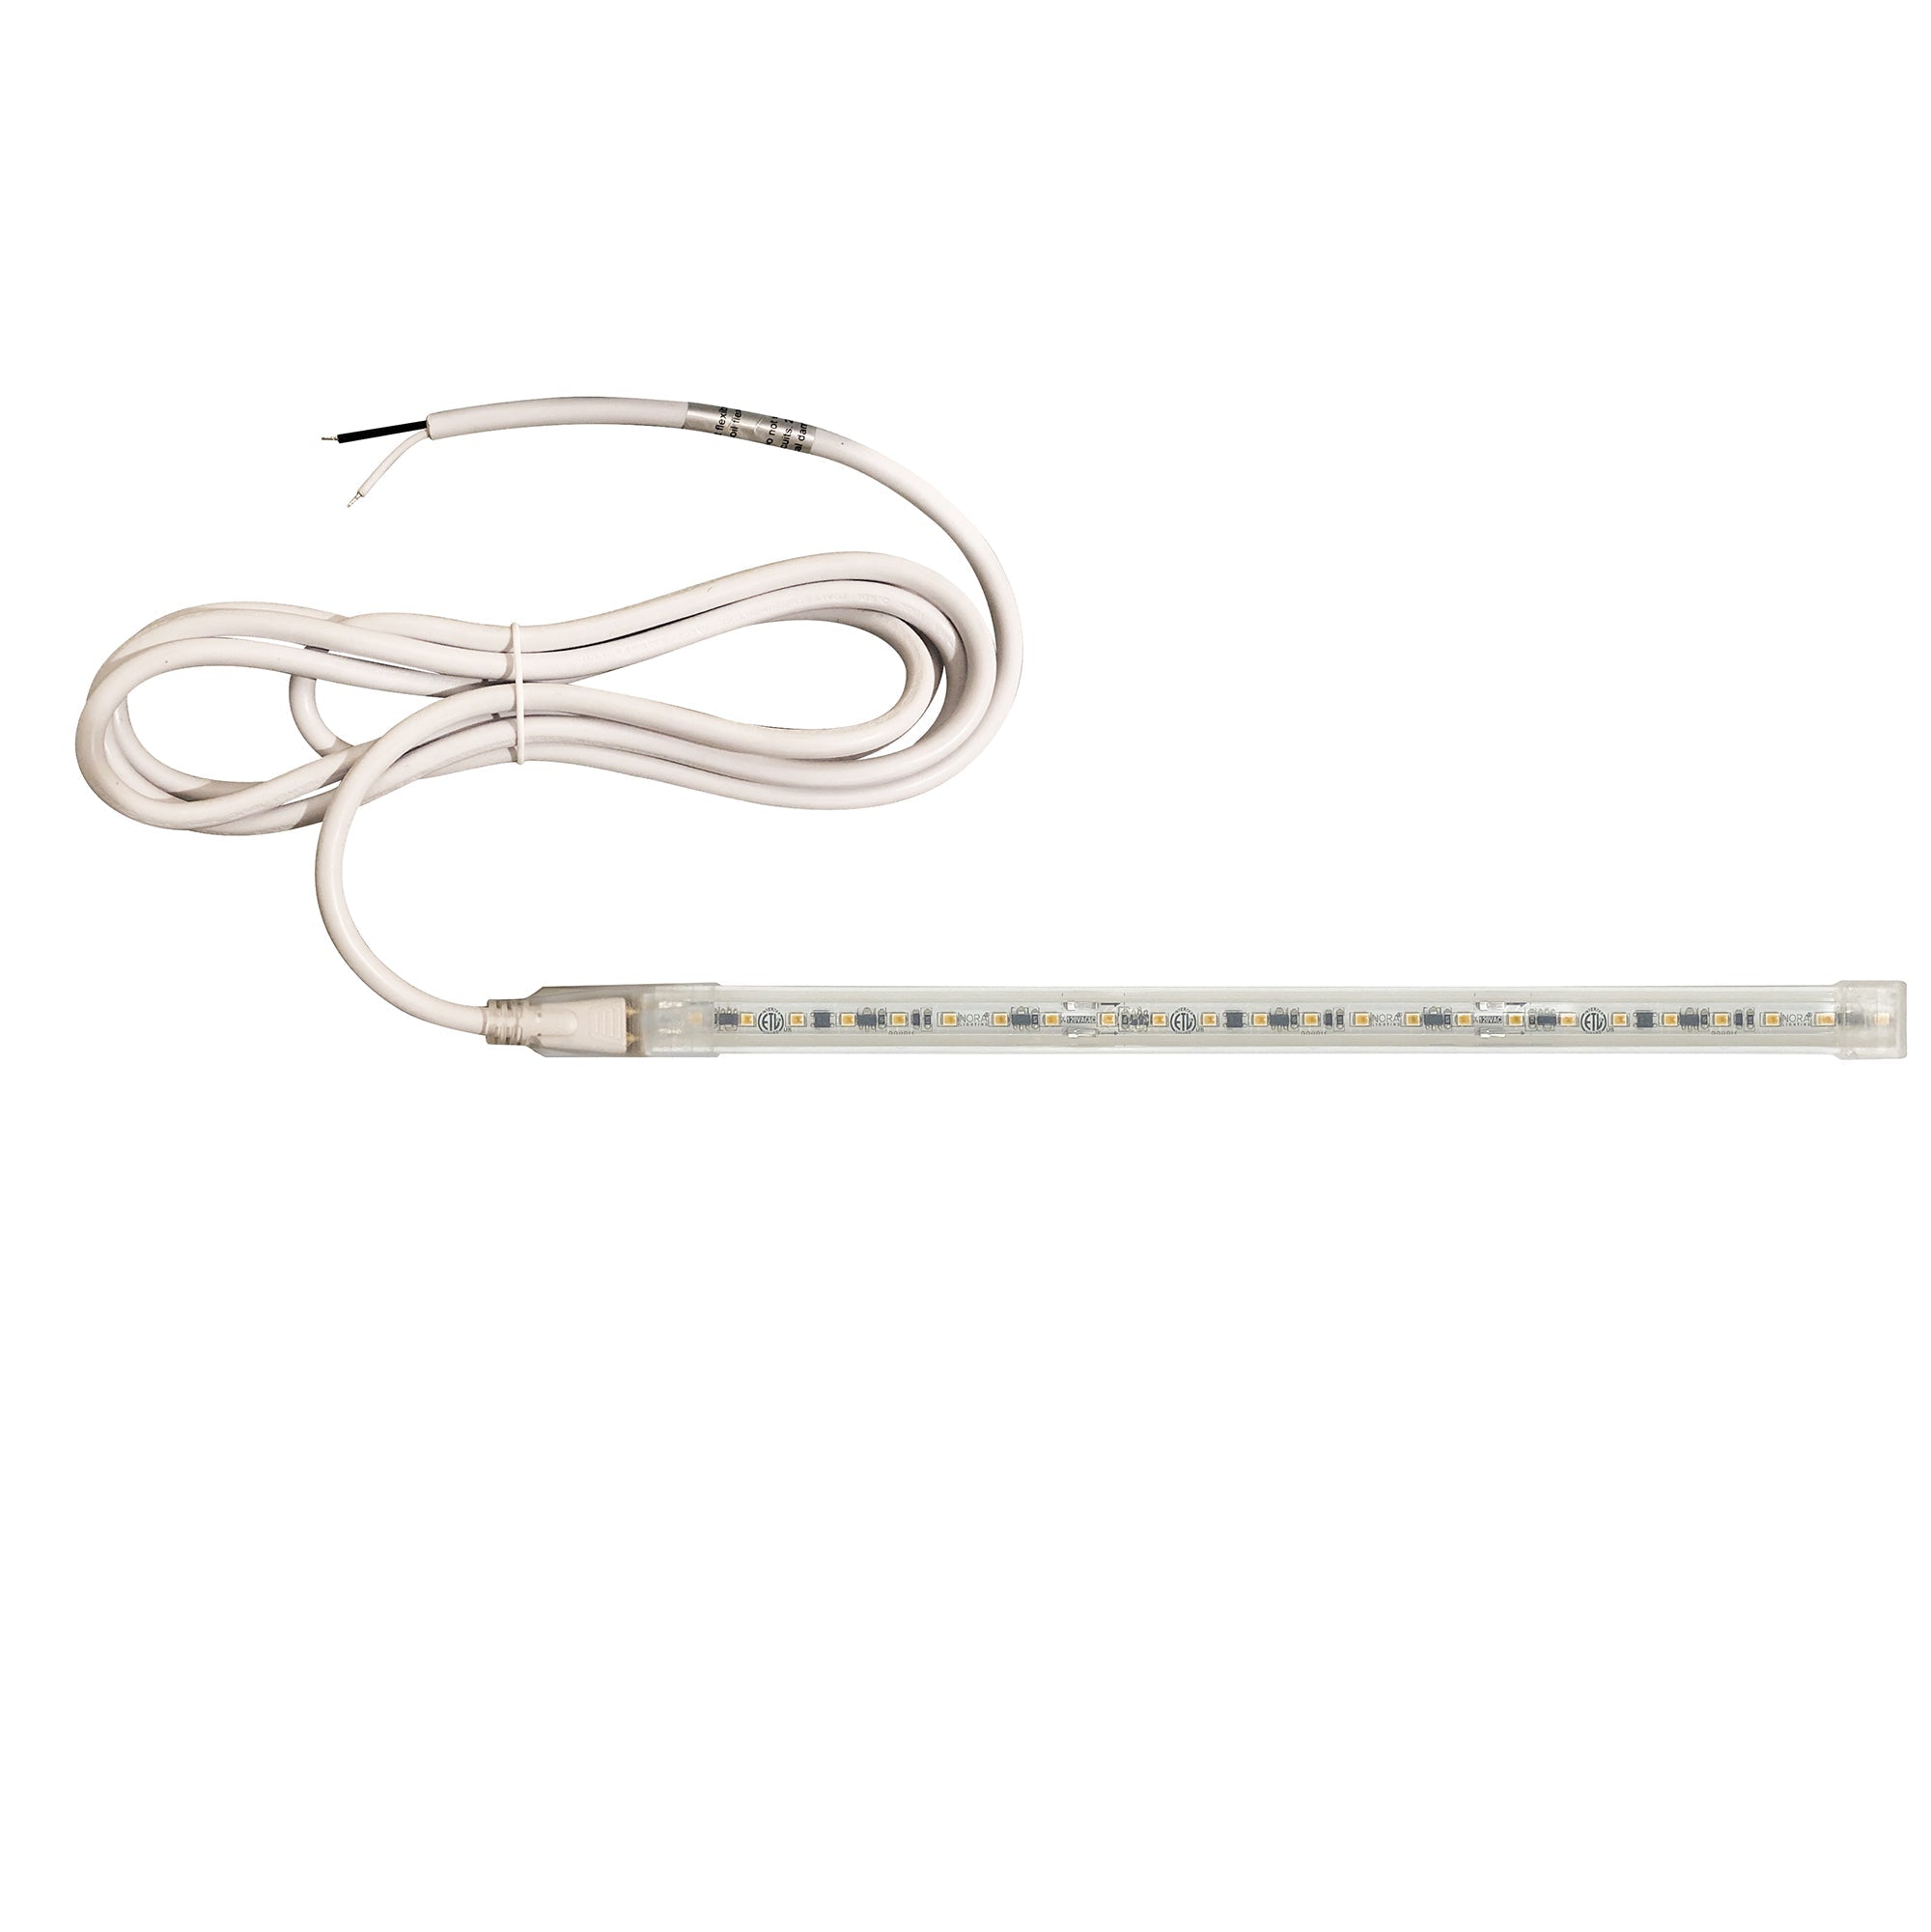 Nora Lighting NUTP13-W50-12-930/HW - Accent / Undercabinet - Custom Cut 50-ft 120V Continuous LED Tape Light, 330lm / 3.6W per foot, 3000K, w/ Mounting Clips and 8' Hardwired Power Cord